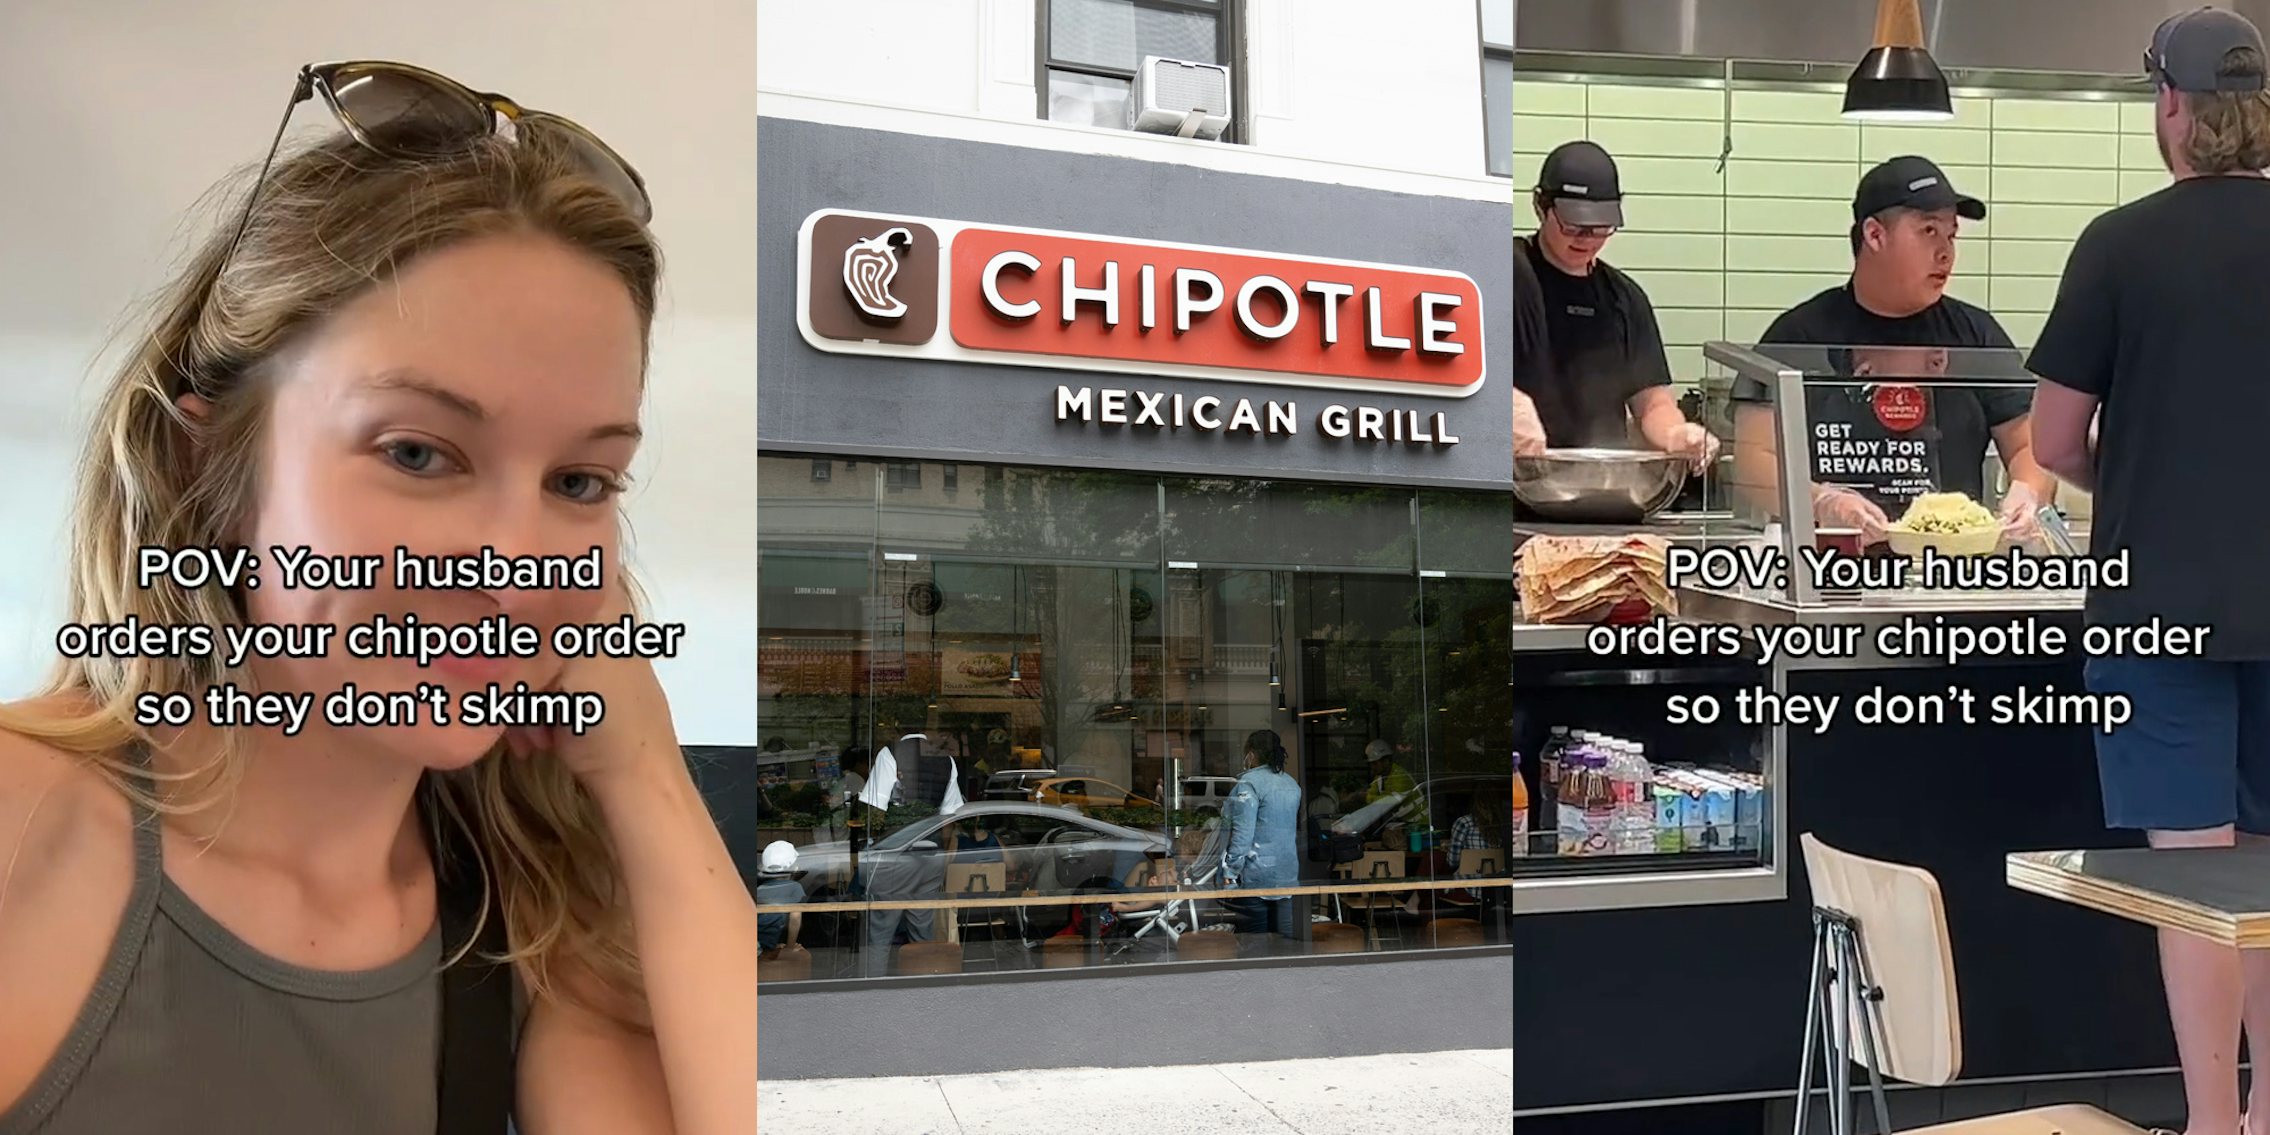 Chipotle customer with caption 'POV: Your husband orders your chipotle order so they don't skimp' (l) Chipotle sign on building above window (c) Chipotle customer ordering with caption 'POV: Your husband orders your chipotle order so they don't skimp' (r)